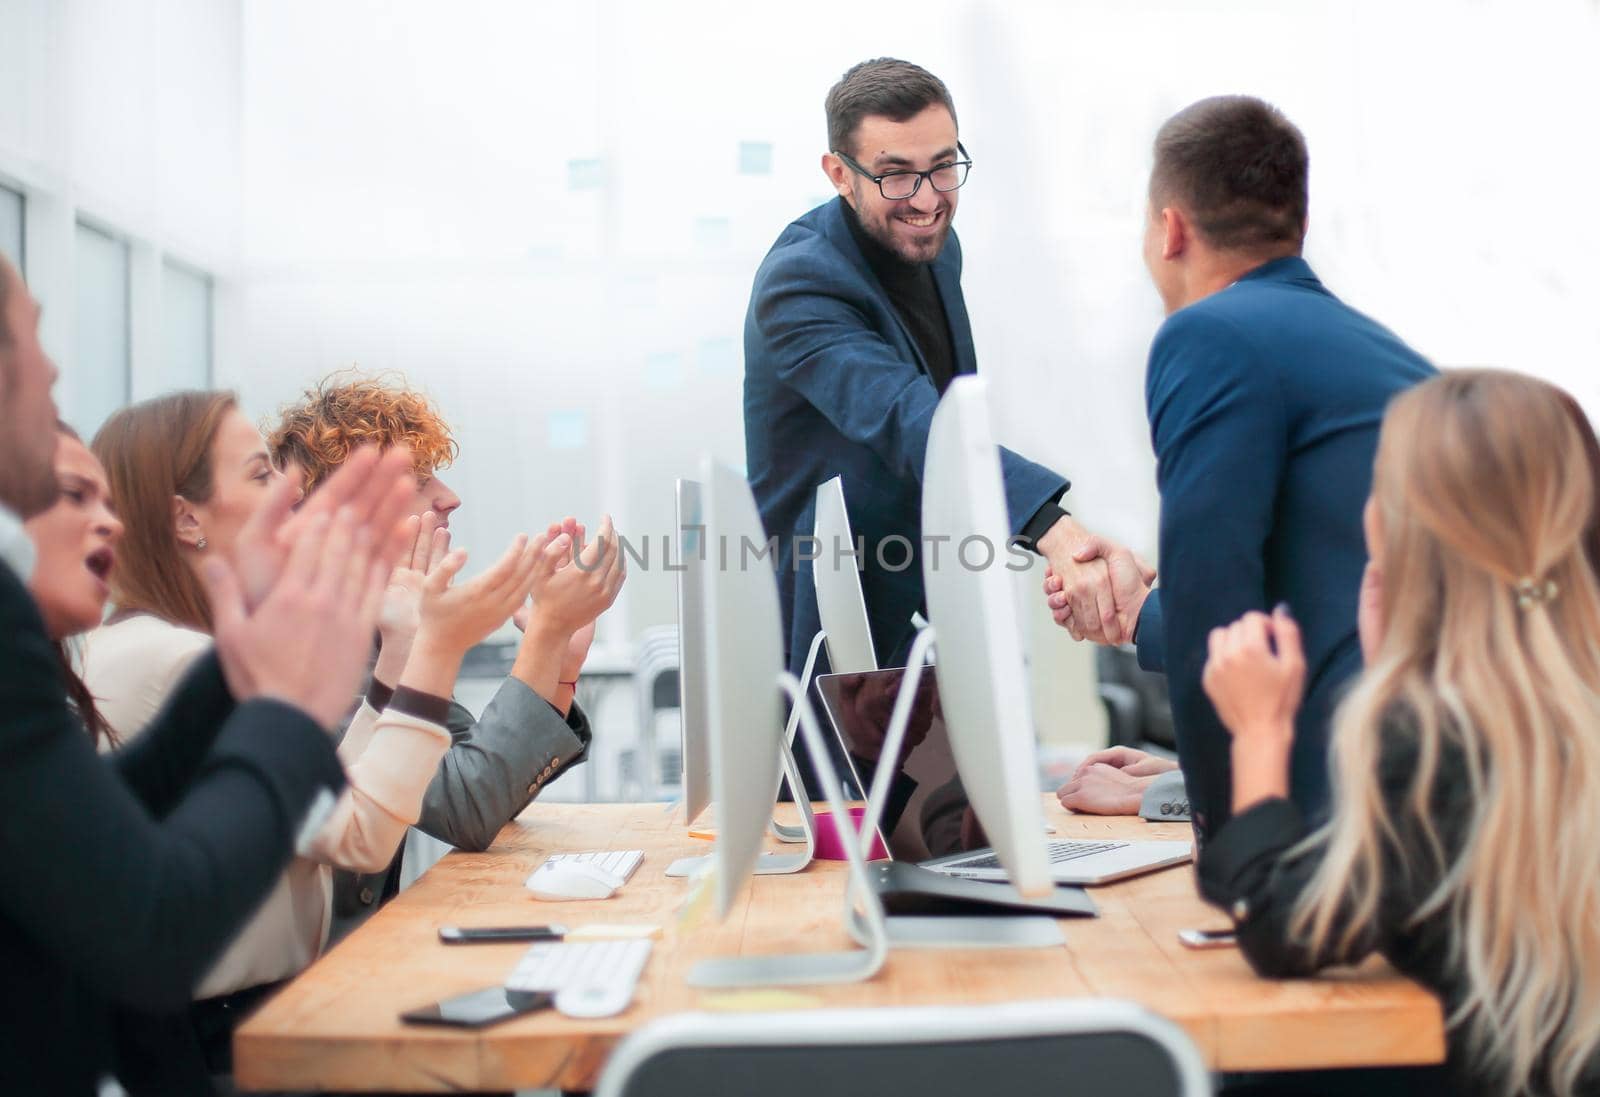 business people shaking hands at a work meeting. photo with copy space